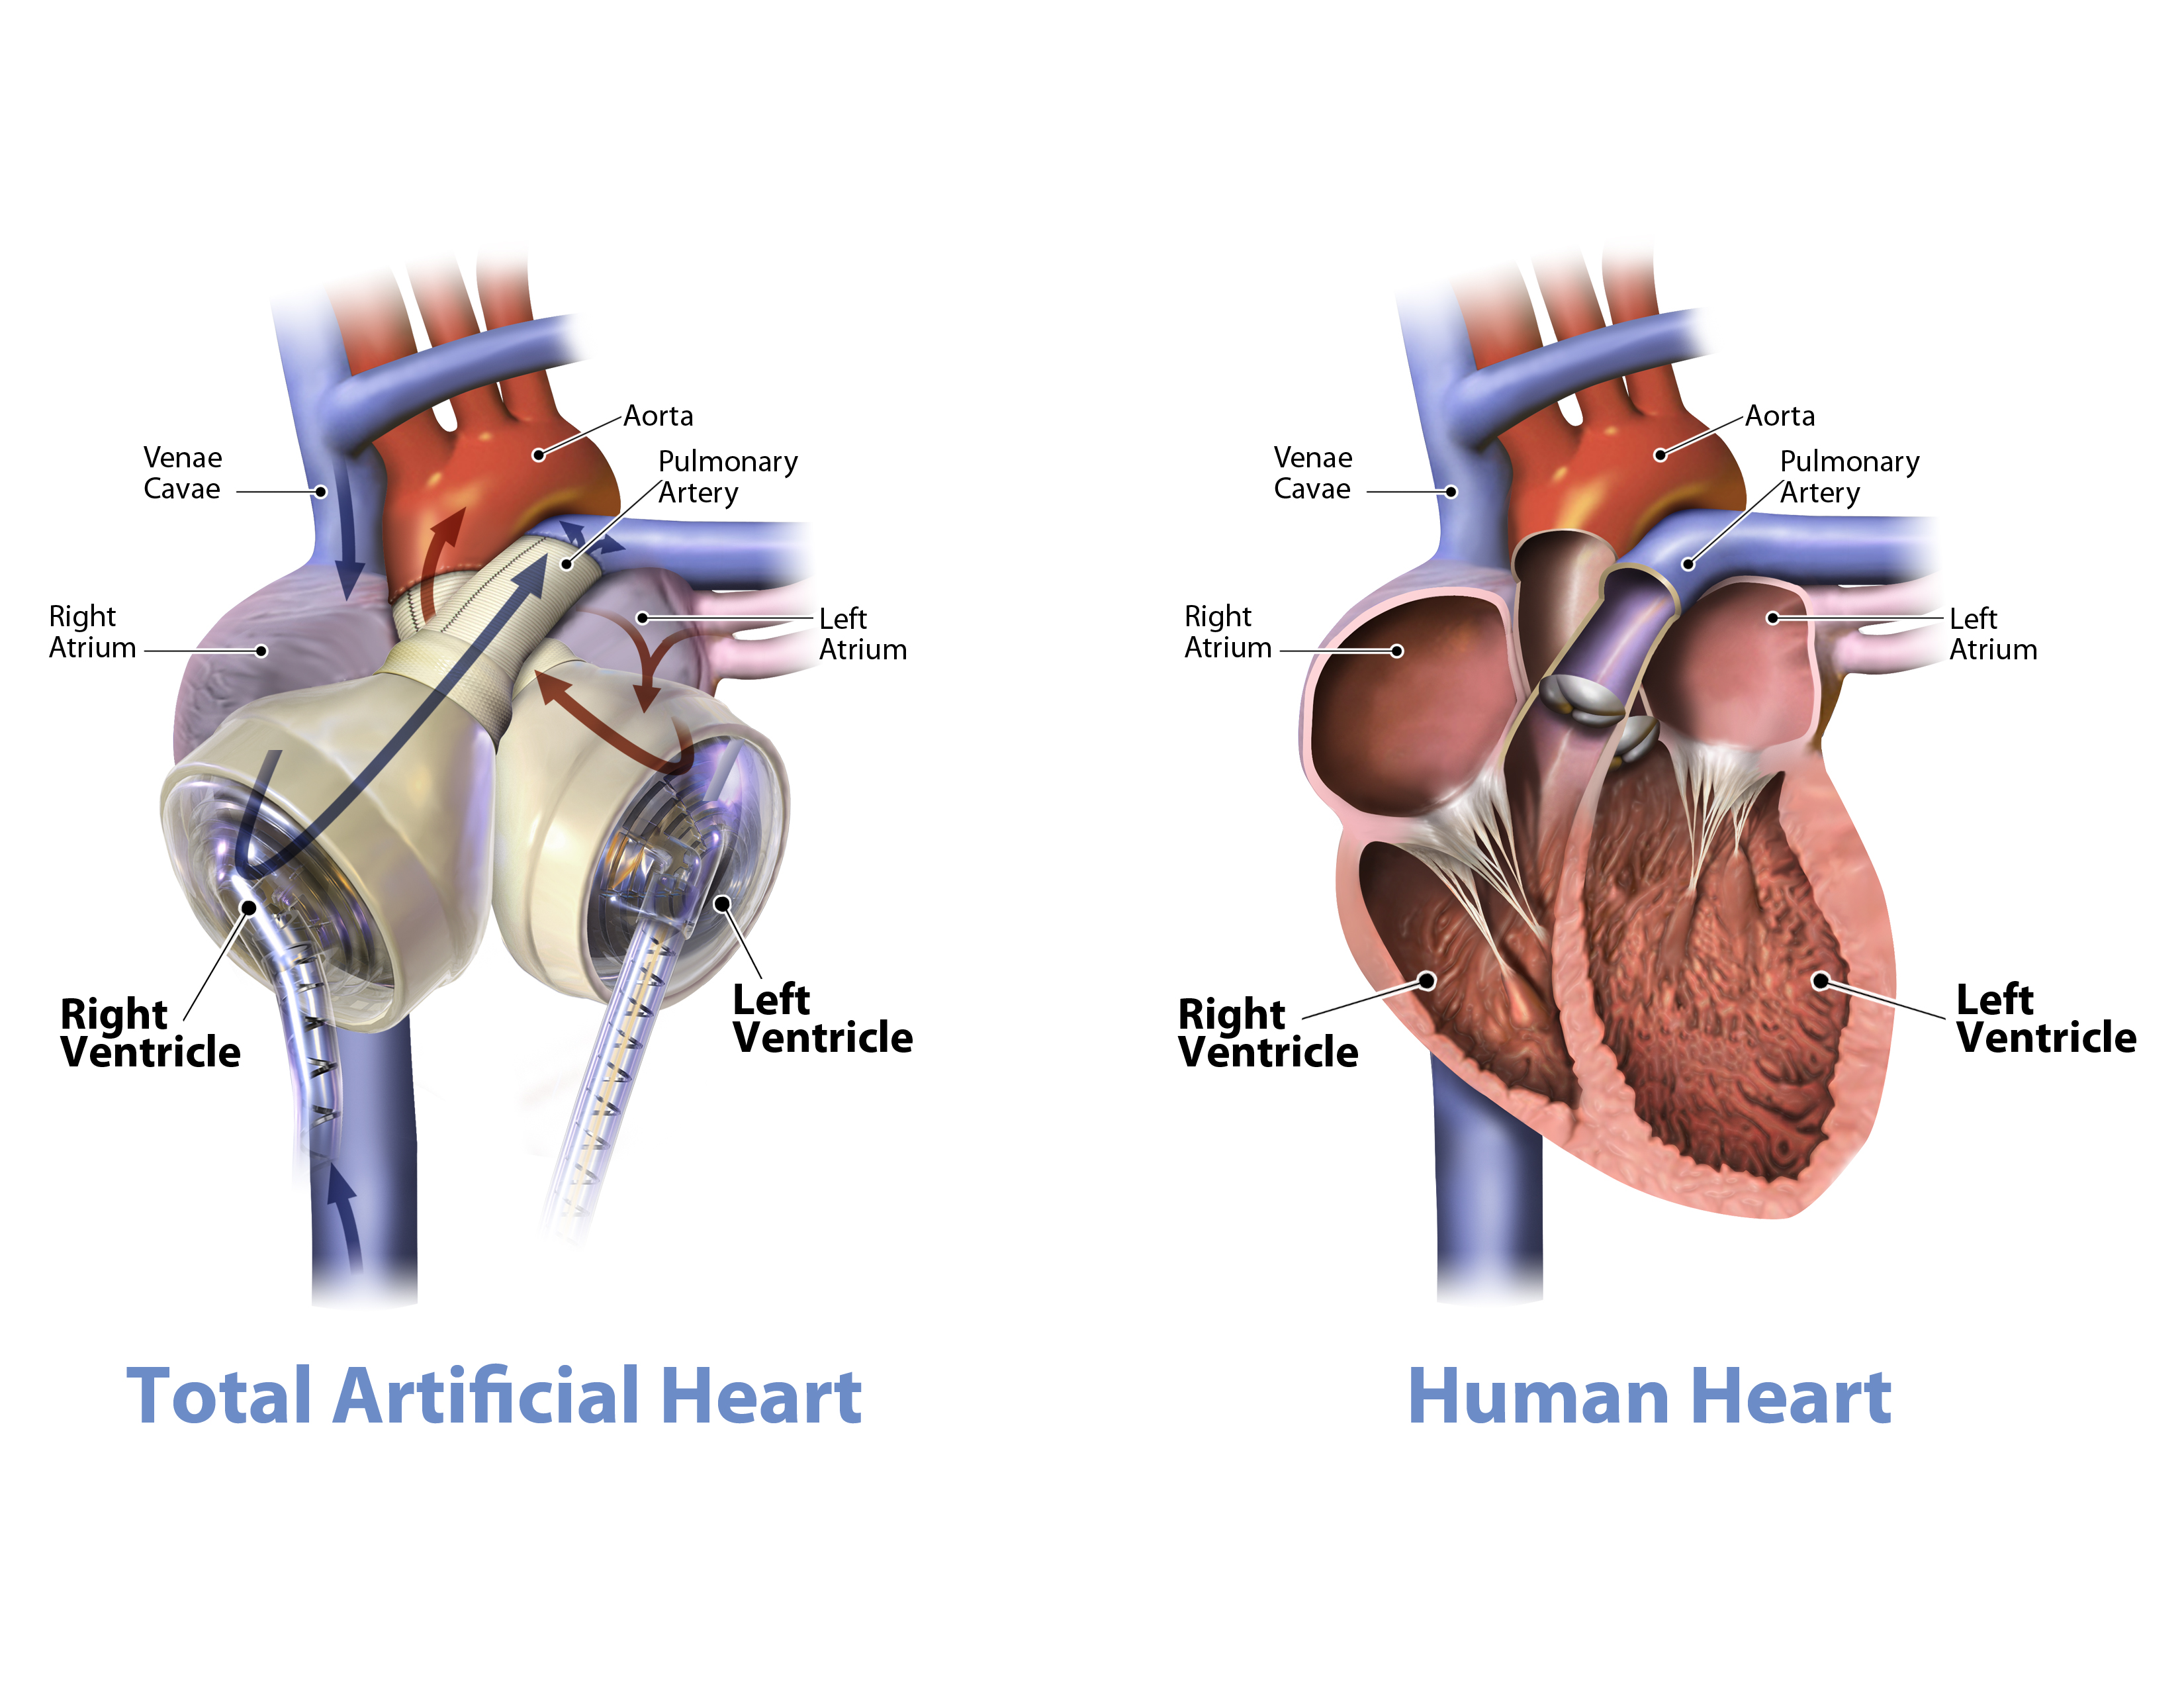 What is the human heart made of?